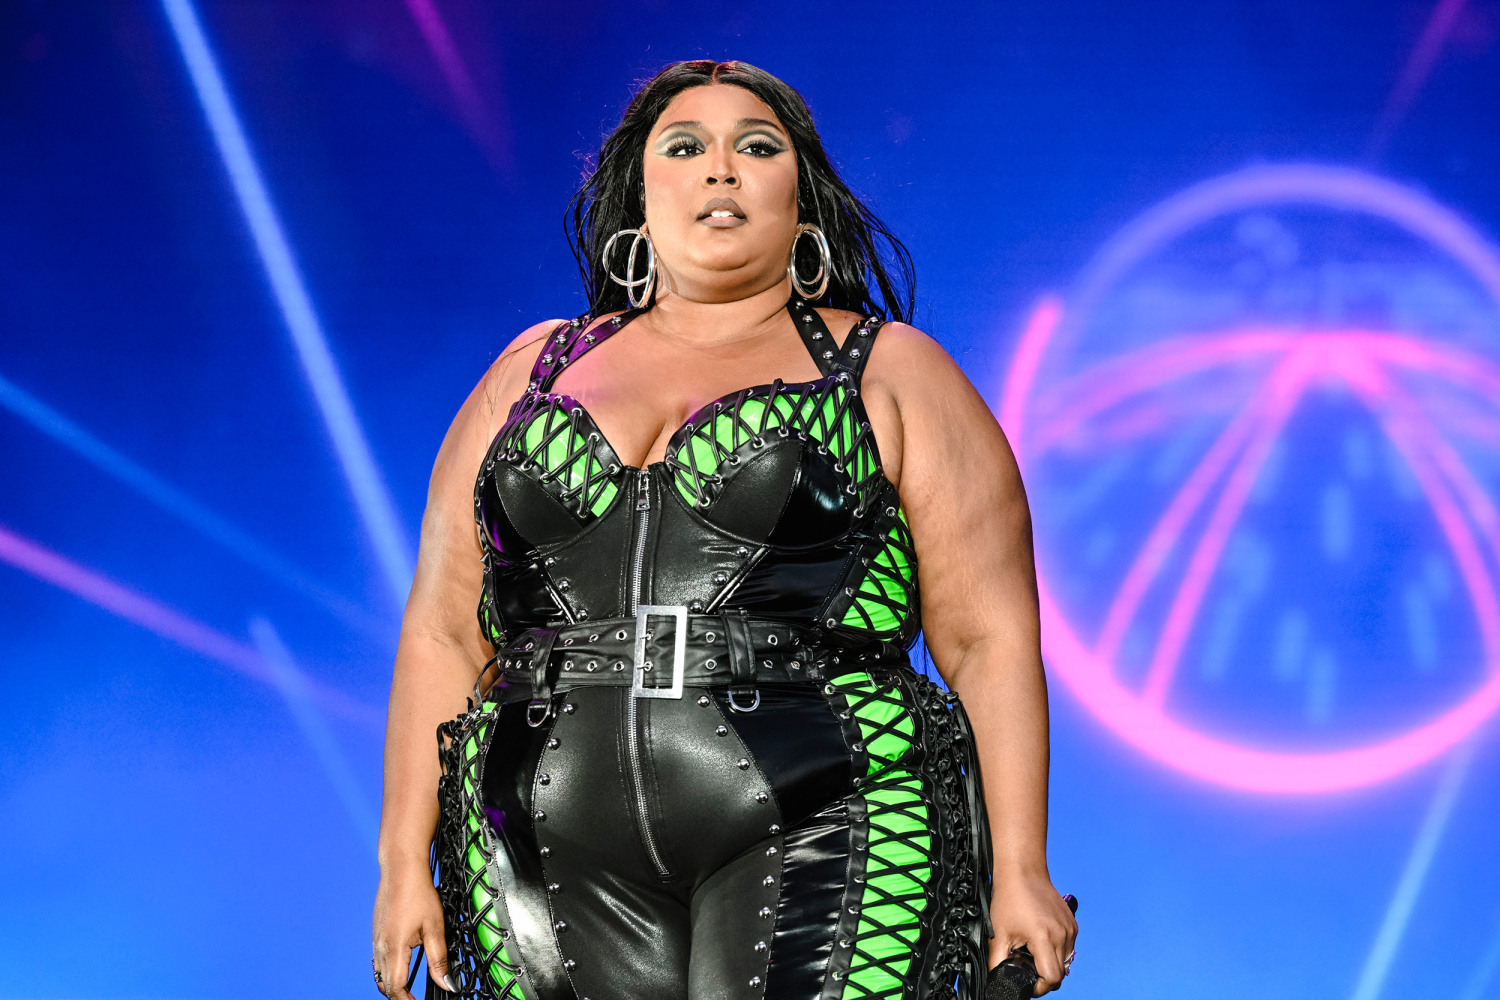 Lizzo's 'Big Grrl' Dancers Praise Her for 'Breaking Barriers' in Letter